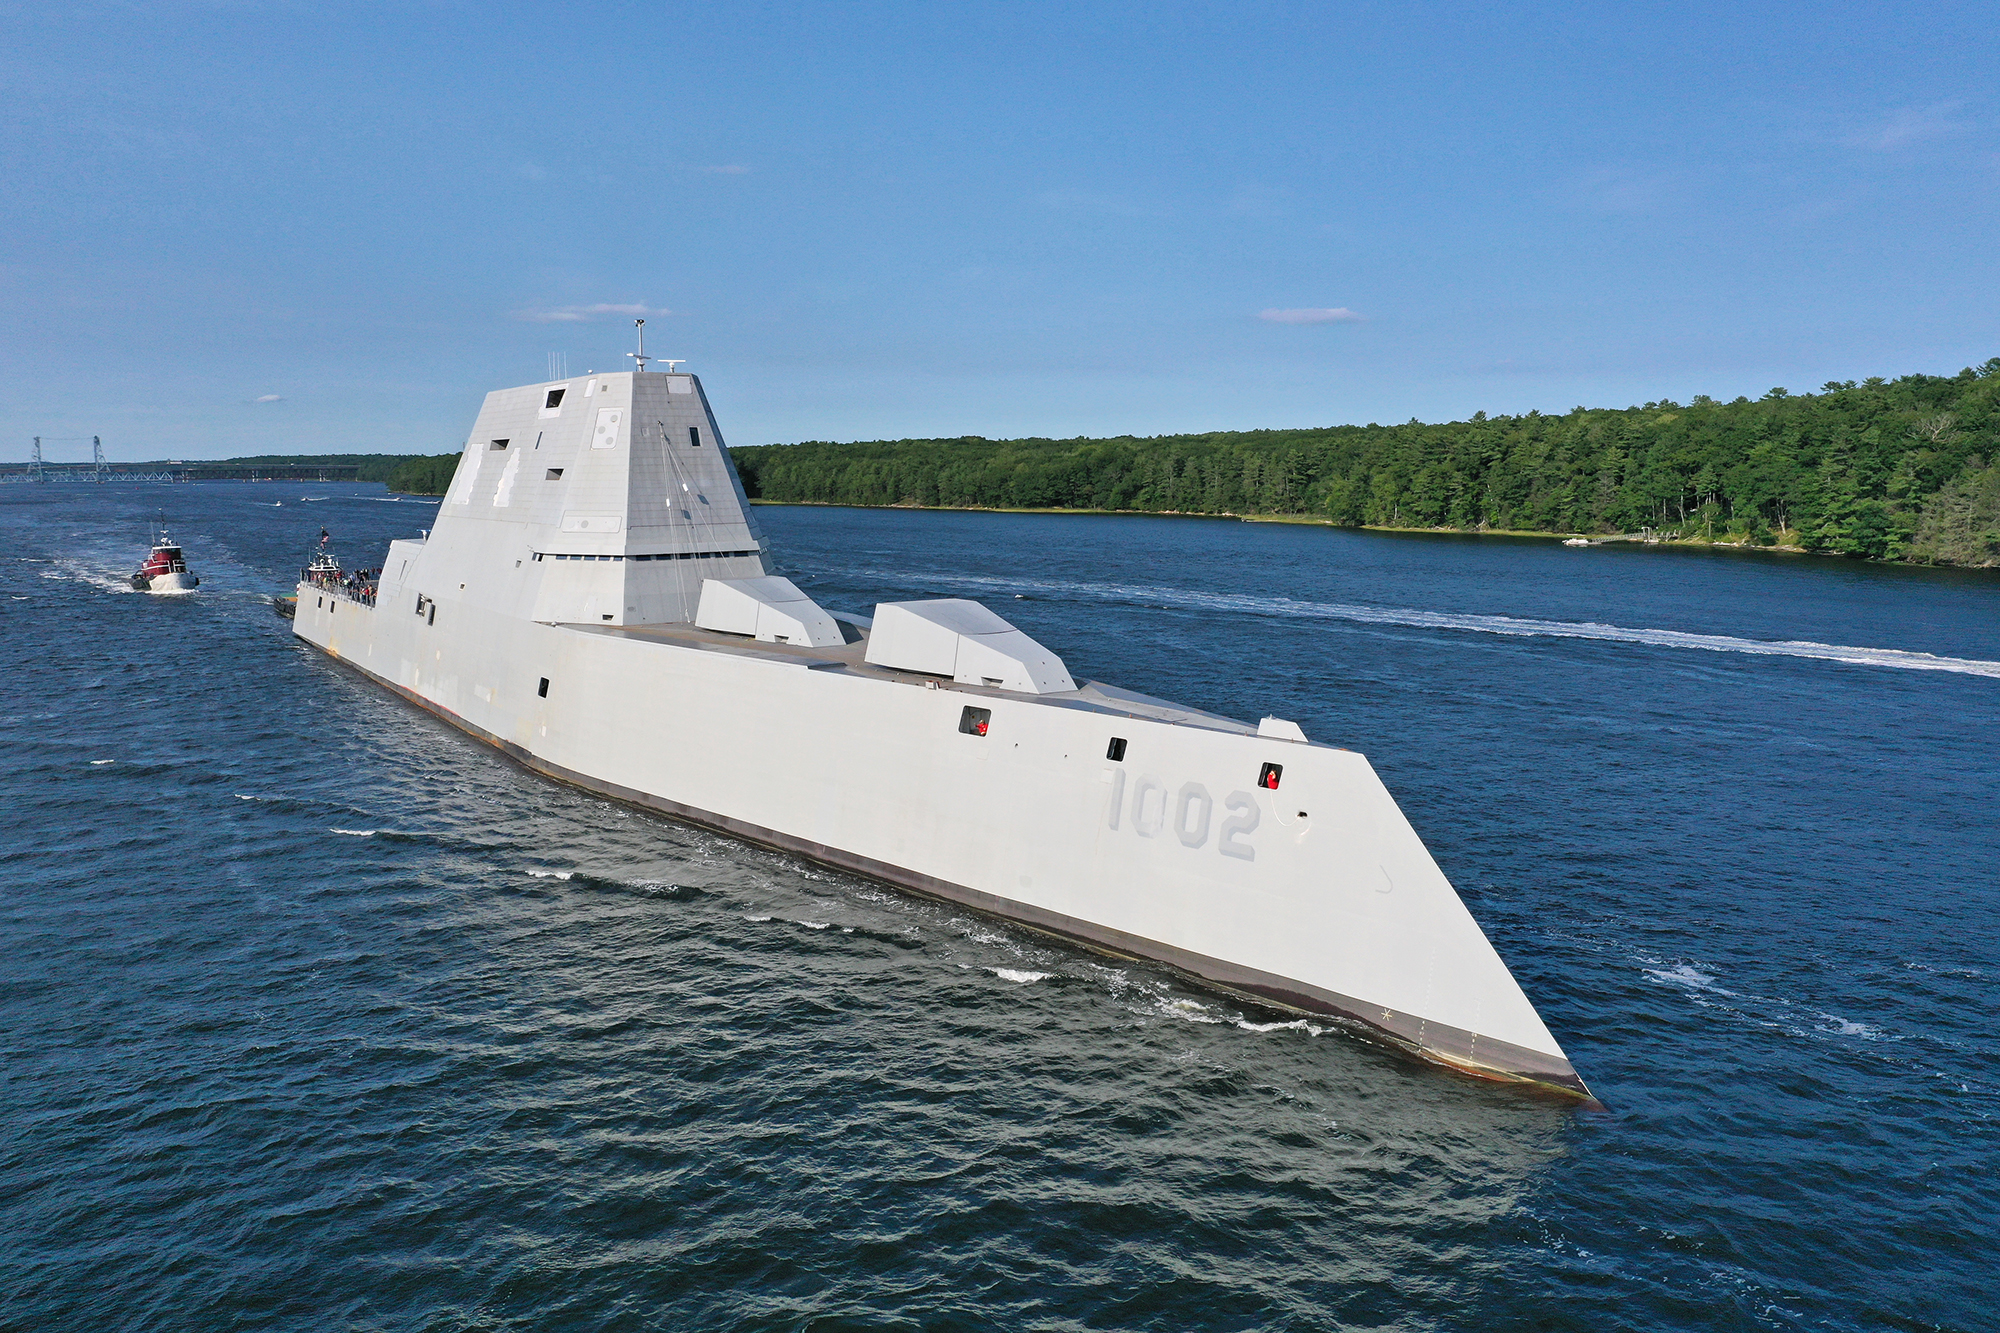 Last Zumwalt Destroyer Completes Builder's Trials - Breaking Defense Breaking Defense - Defense industry news, analysis and commentary